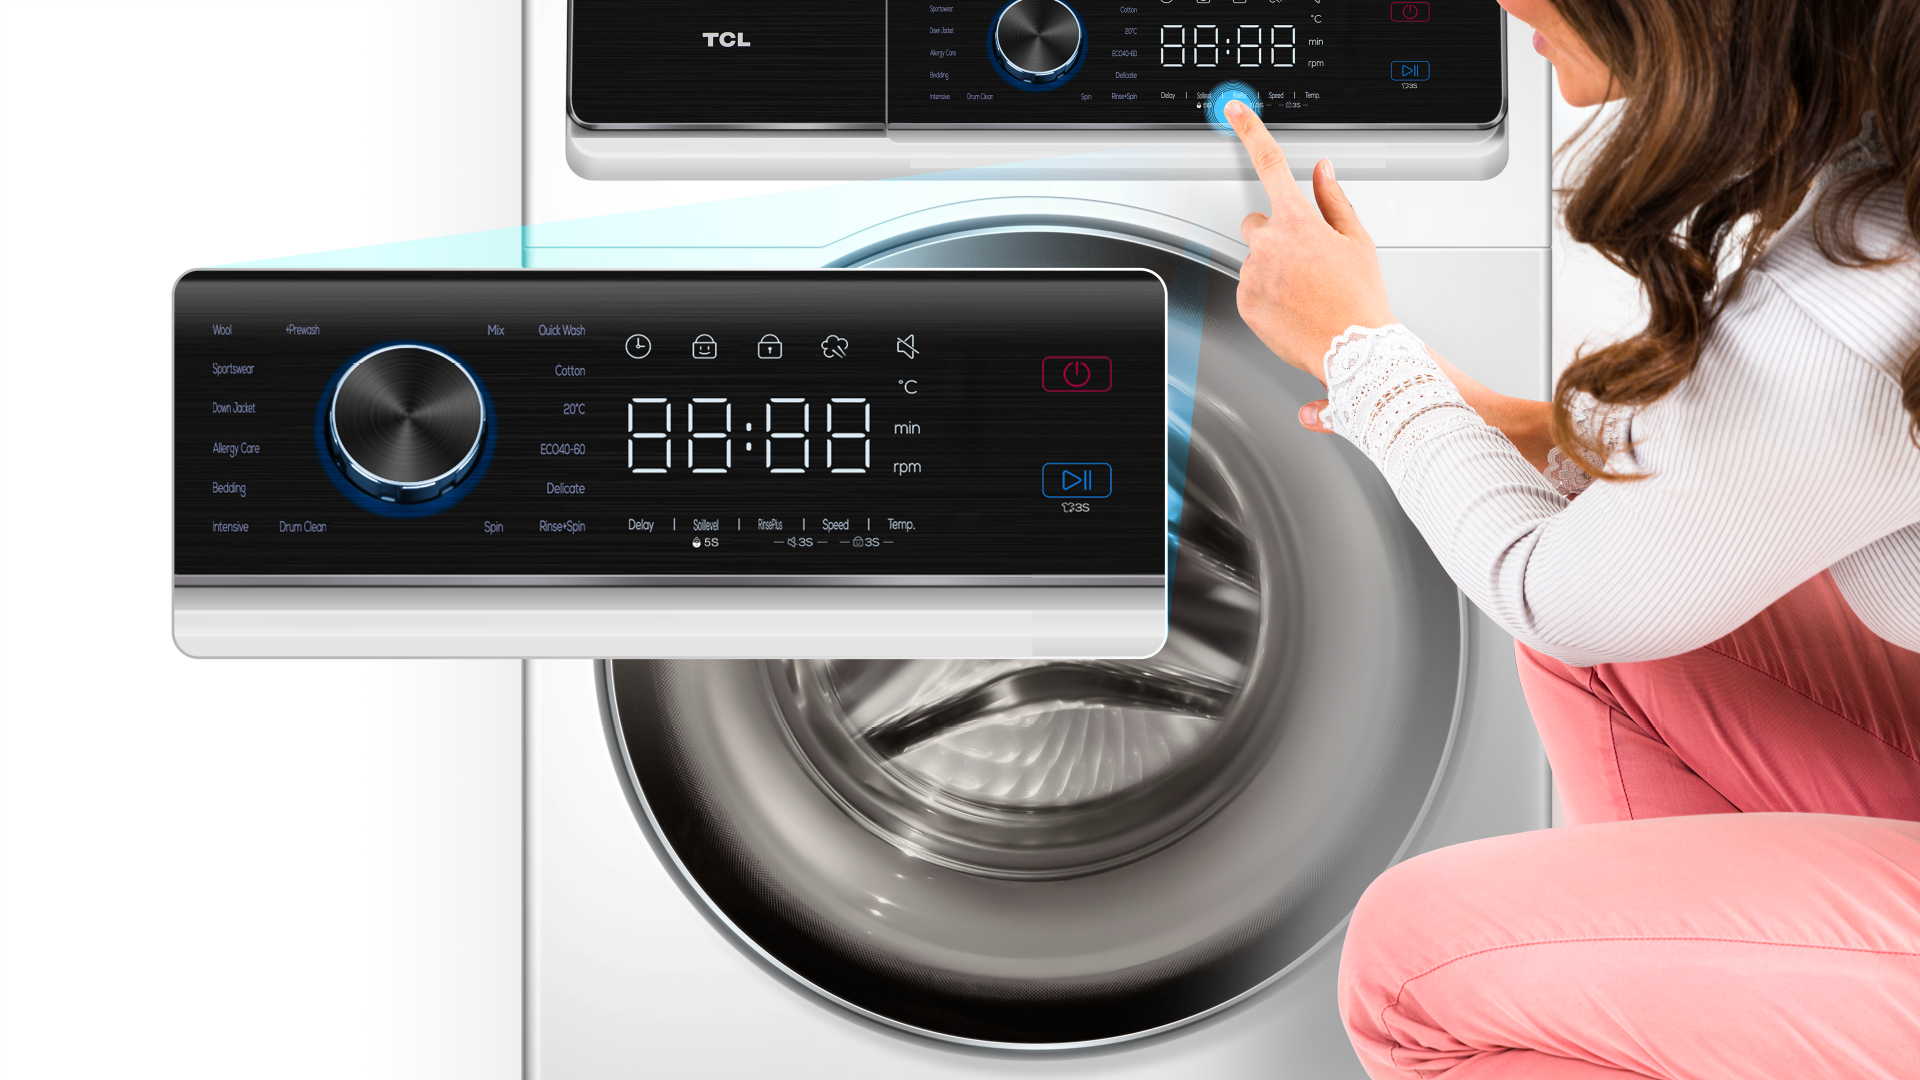 TCL Washing Machine cp0824wc0 Touch Control Display